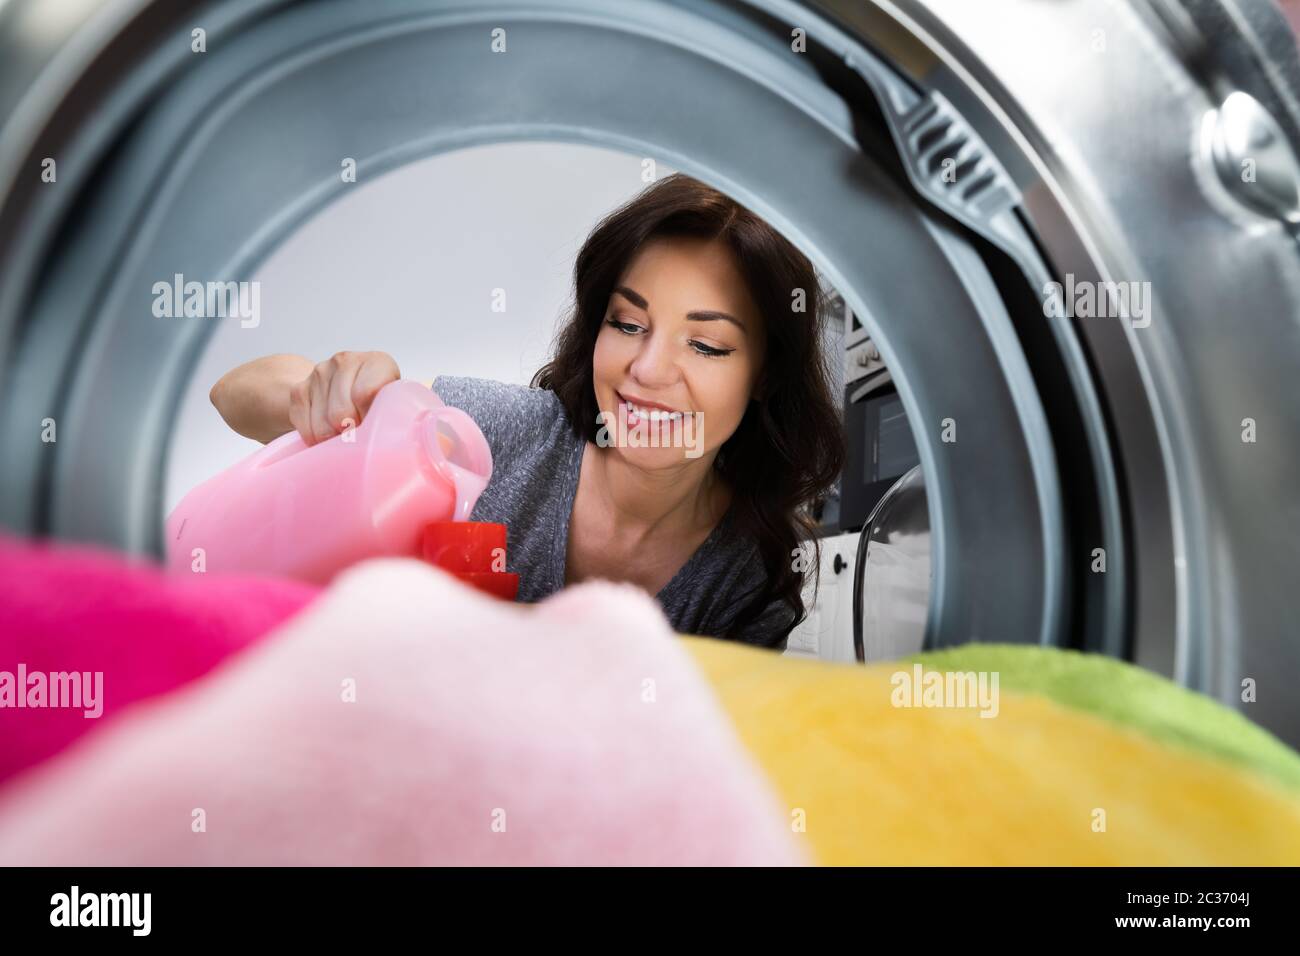 Washing Powder Detergent And Measuring Cup Pouring Into Machine. Household  Duties, Clothes Laundry Obejcts Concept. Stock Photo, Picture and Royalty  Free Image. Image 122874462.